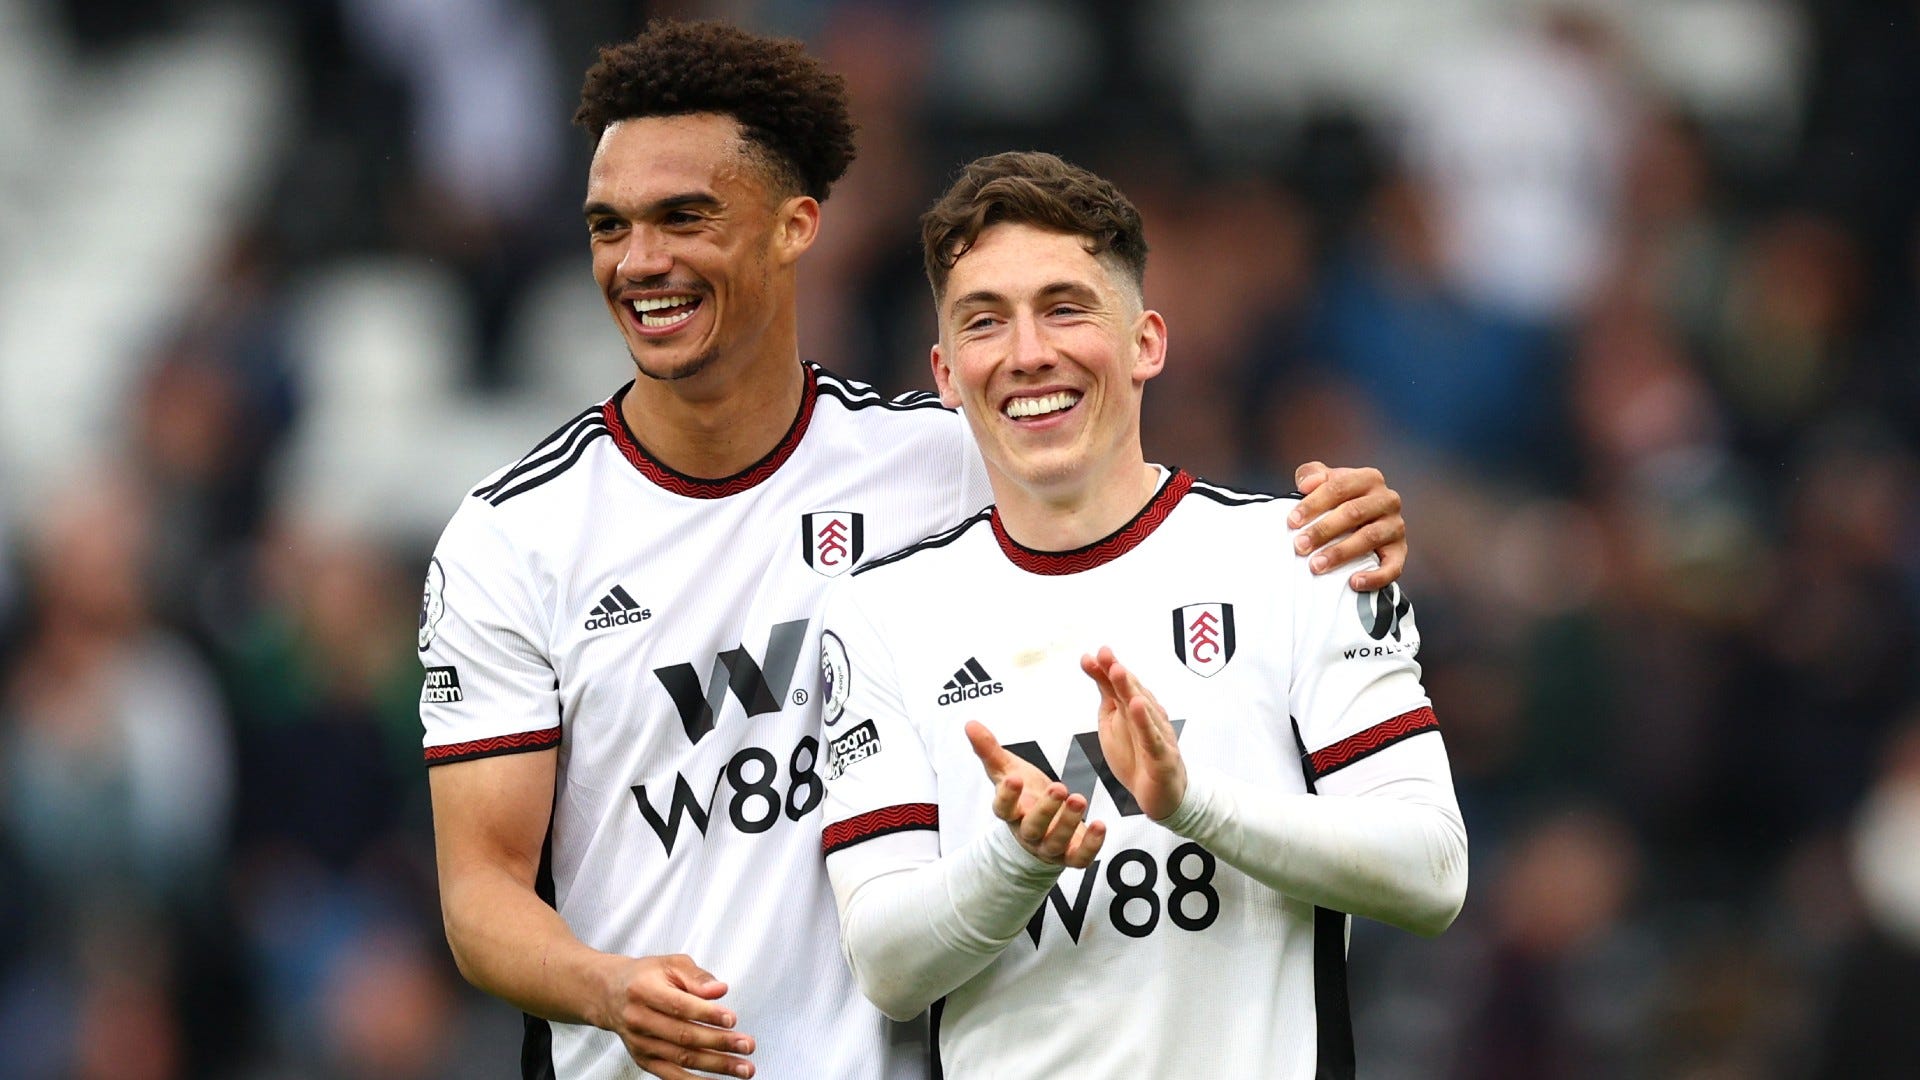 Aston Villa vs Fulham Where to watch the match online, live stream, TV channels and kick-off time Goal US